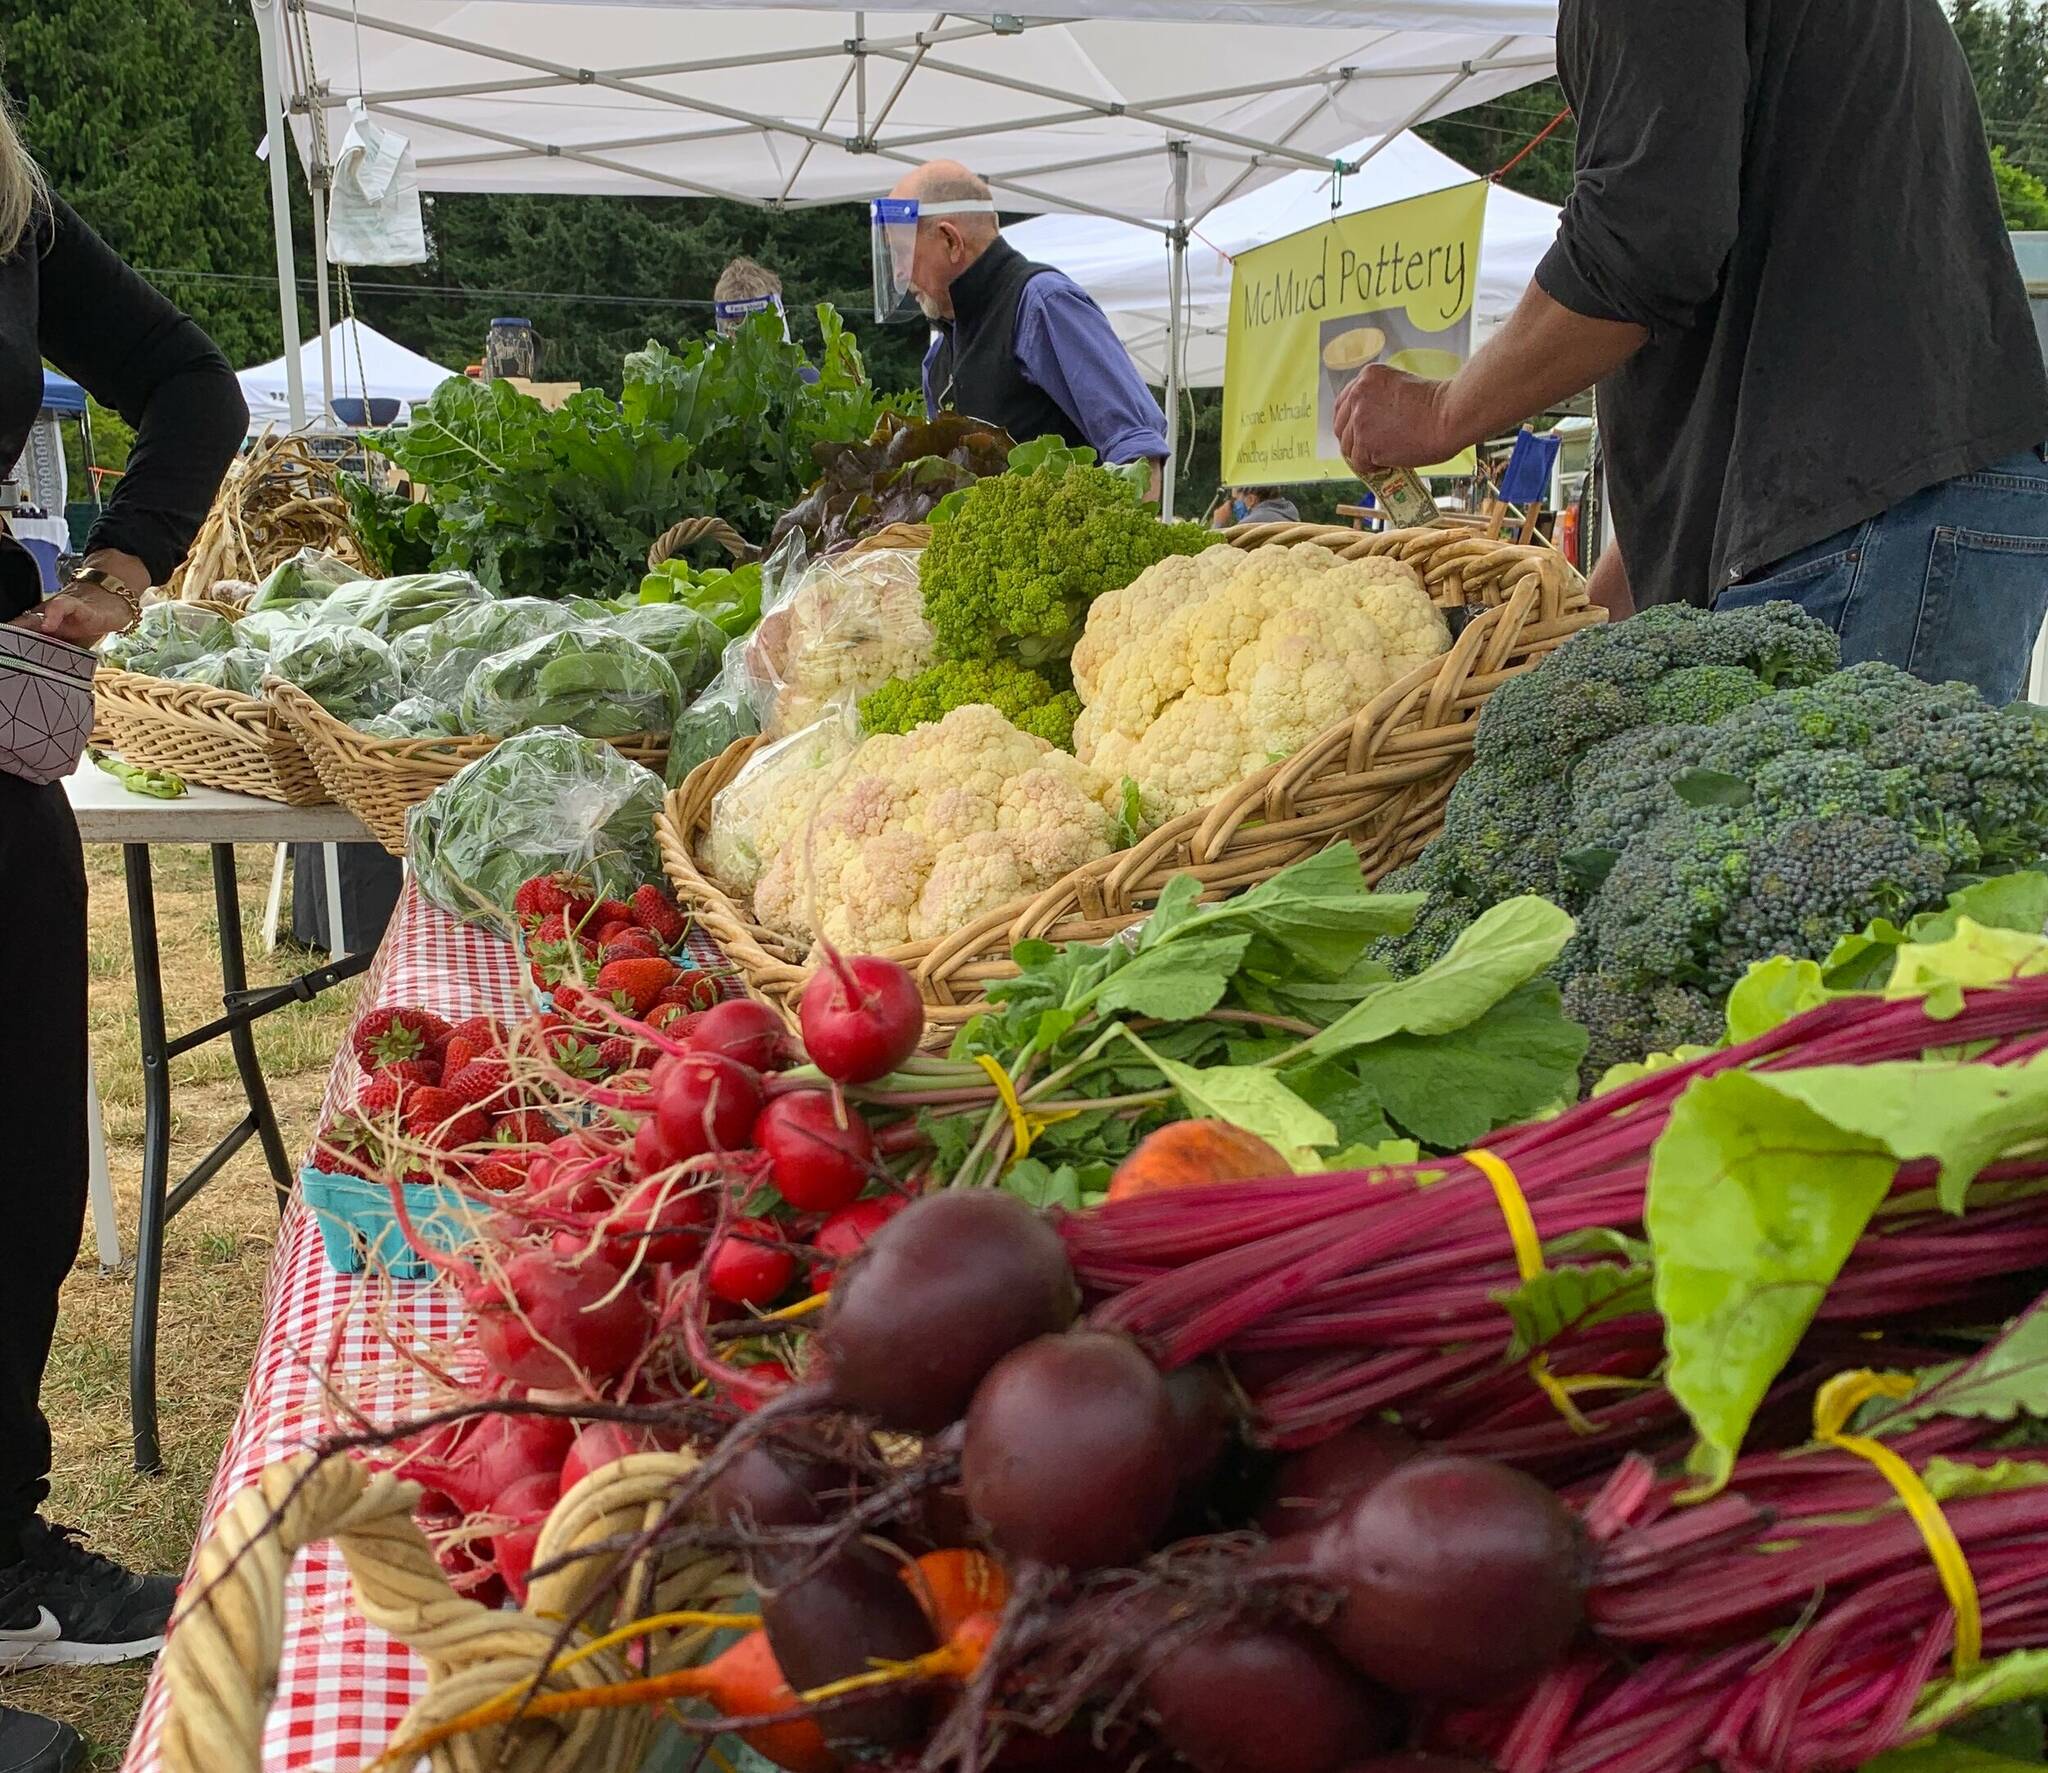 Island farmers markets open this month Whidbey NewsTimes